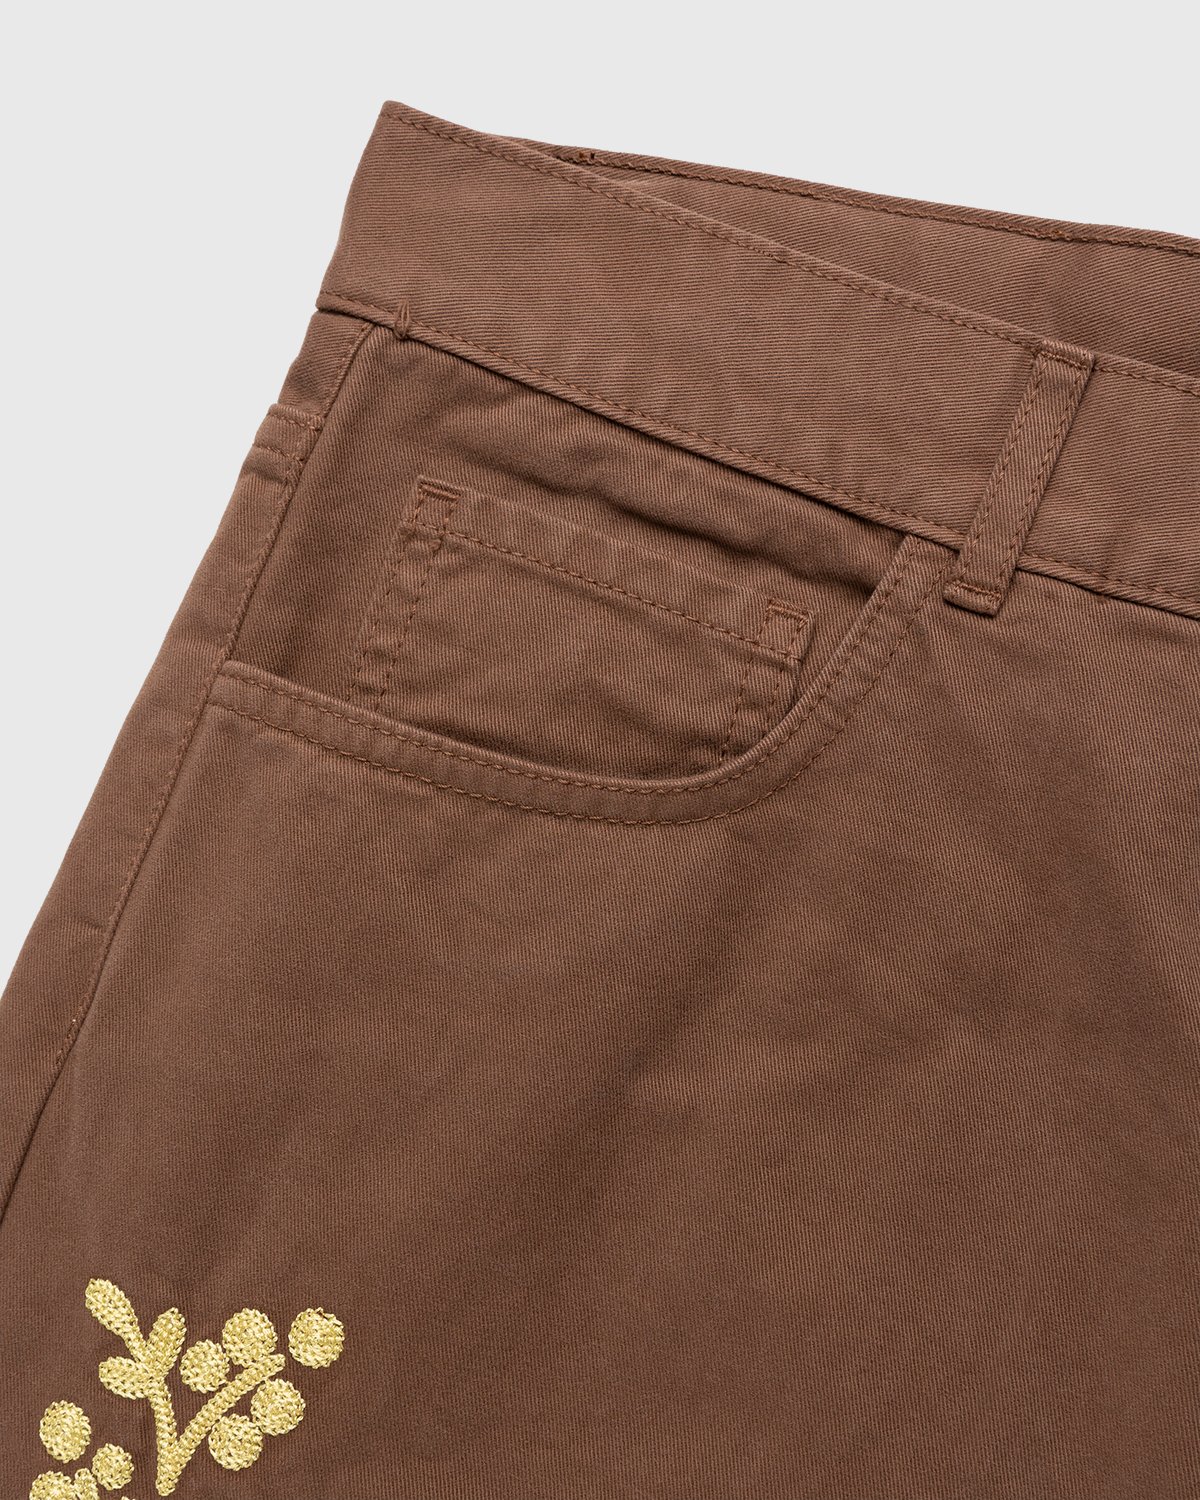 Carne Bollente - The Back Bump Trouser Brown - Clothing - Brown - Image 8